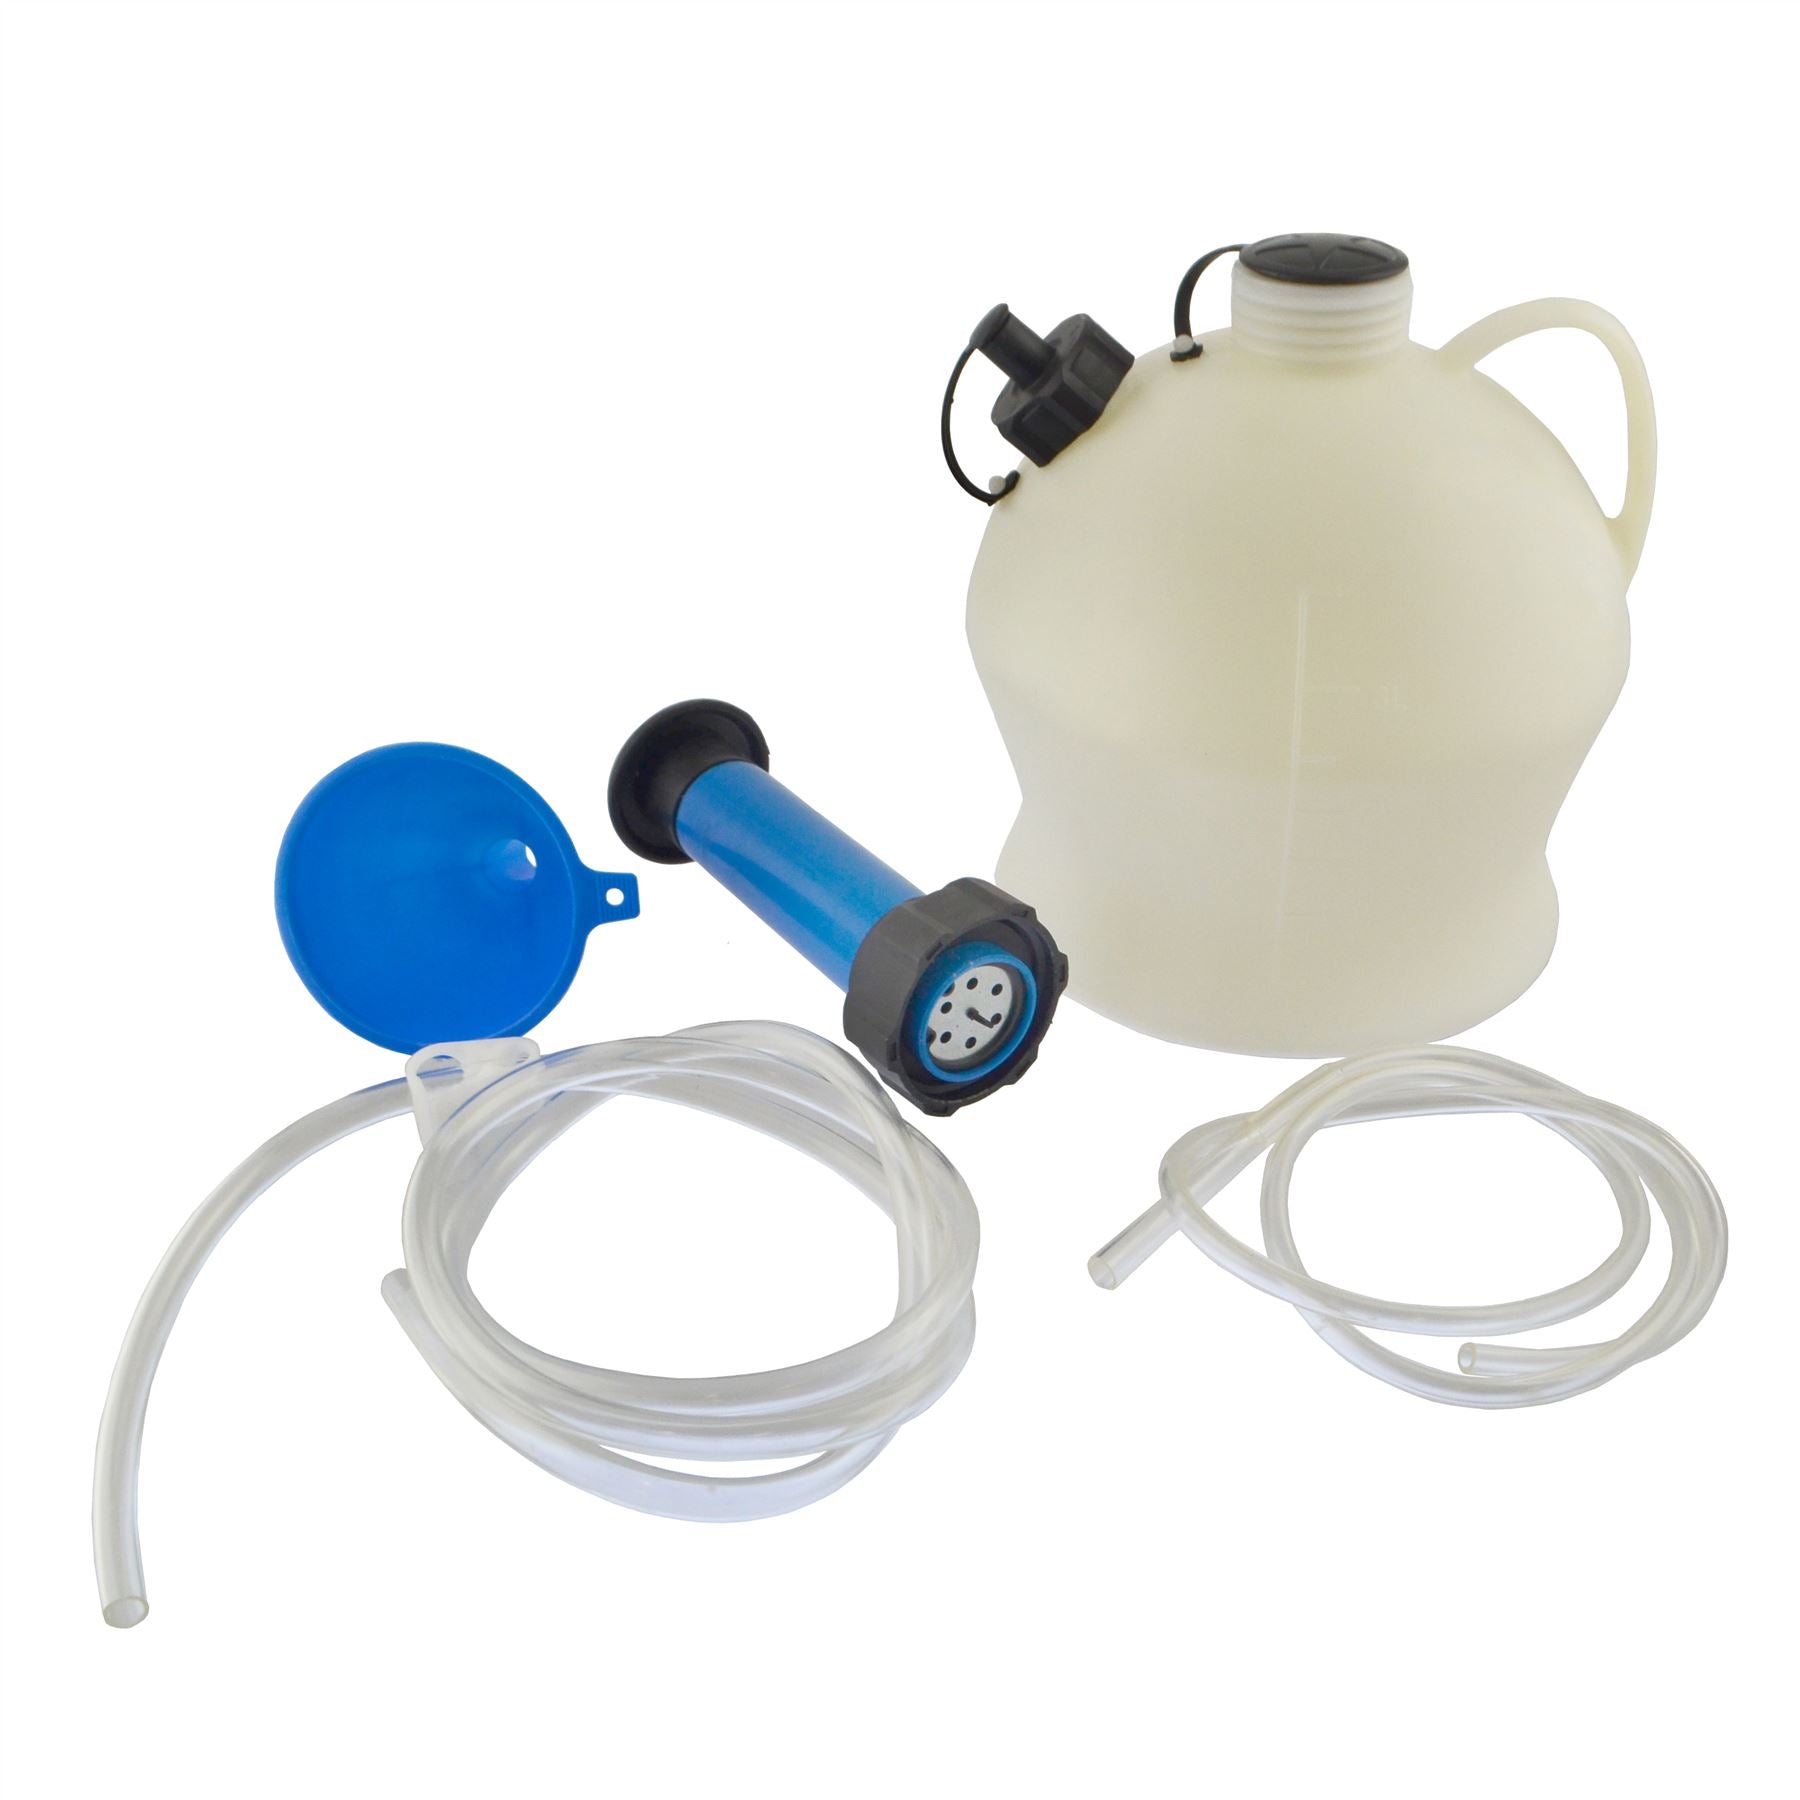 Oil and Fluid extraction siphon pump and container 4 Litre Sil103